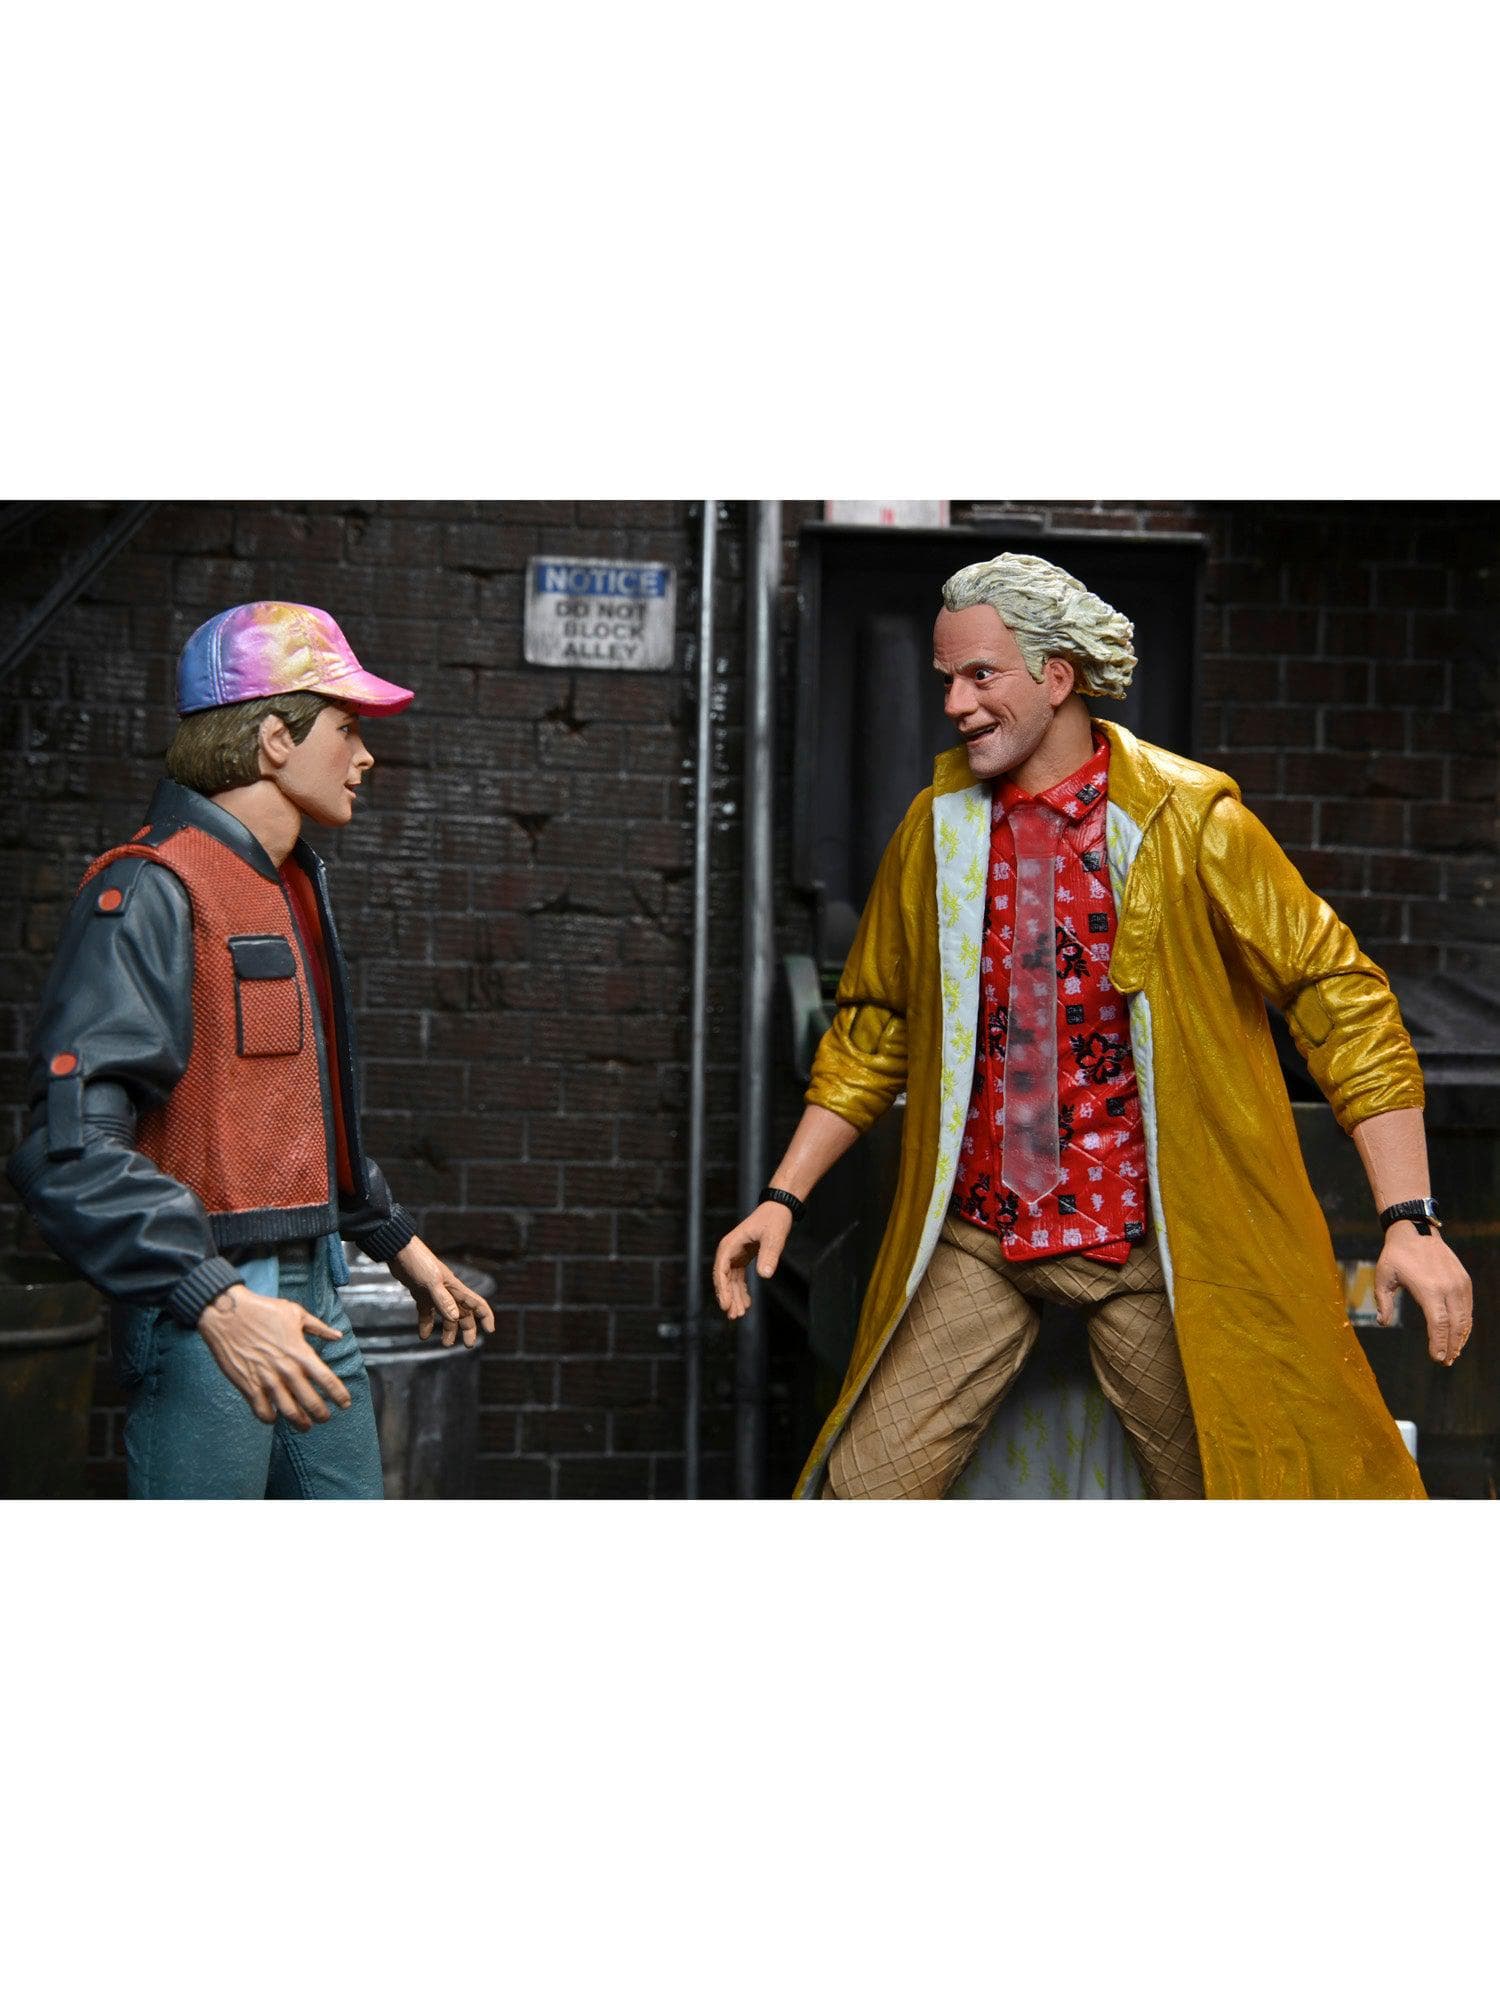 NECA - Back To The Future 2 - 7" Scale Figure - Ultimate Marty - costumes.com